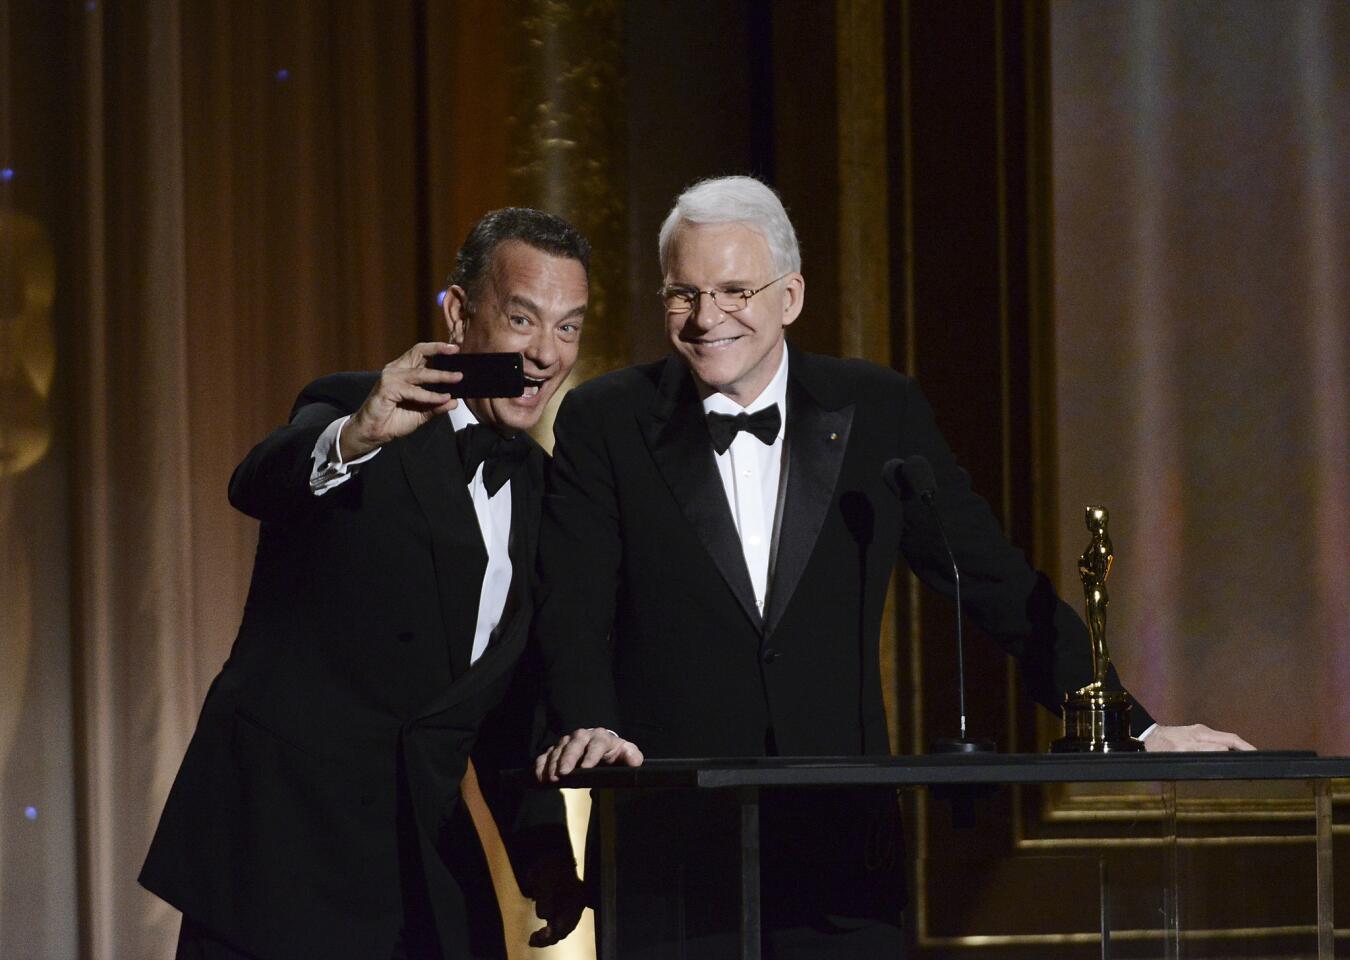 Actor Tom Hanks, left, takes a photo with actor and honoree Steve Martin at the 2013 Governors Awards in Los Angeles.